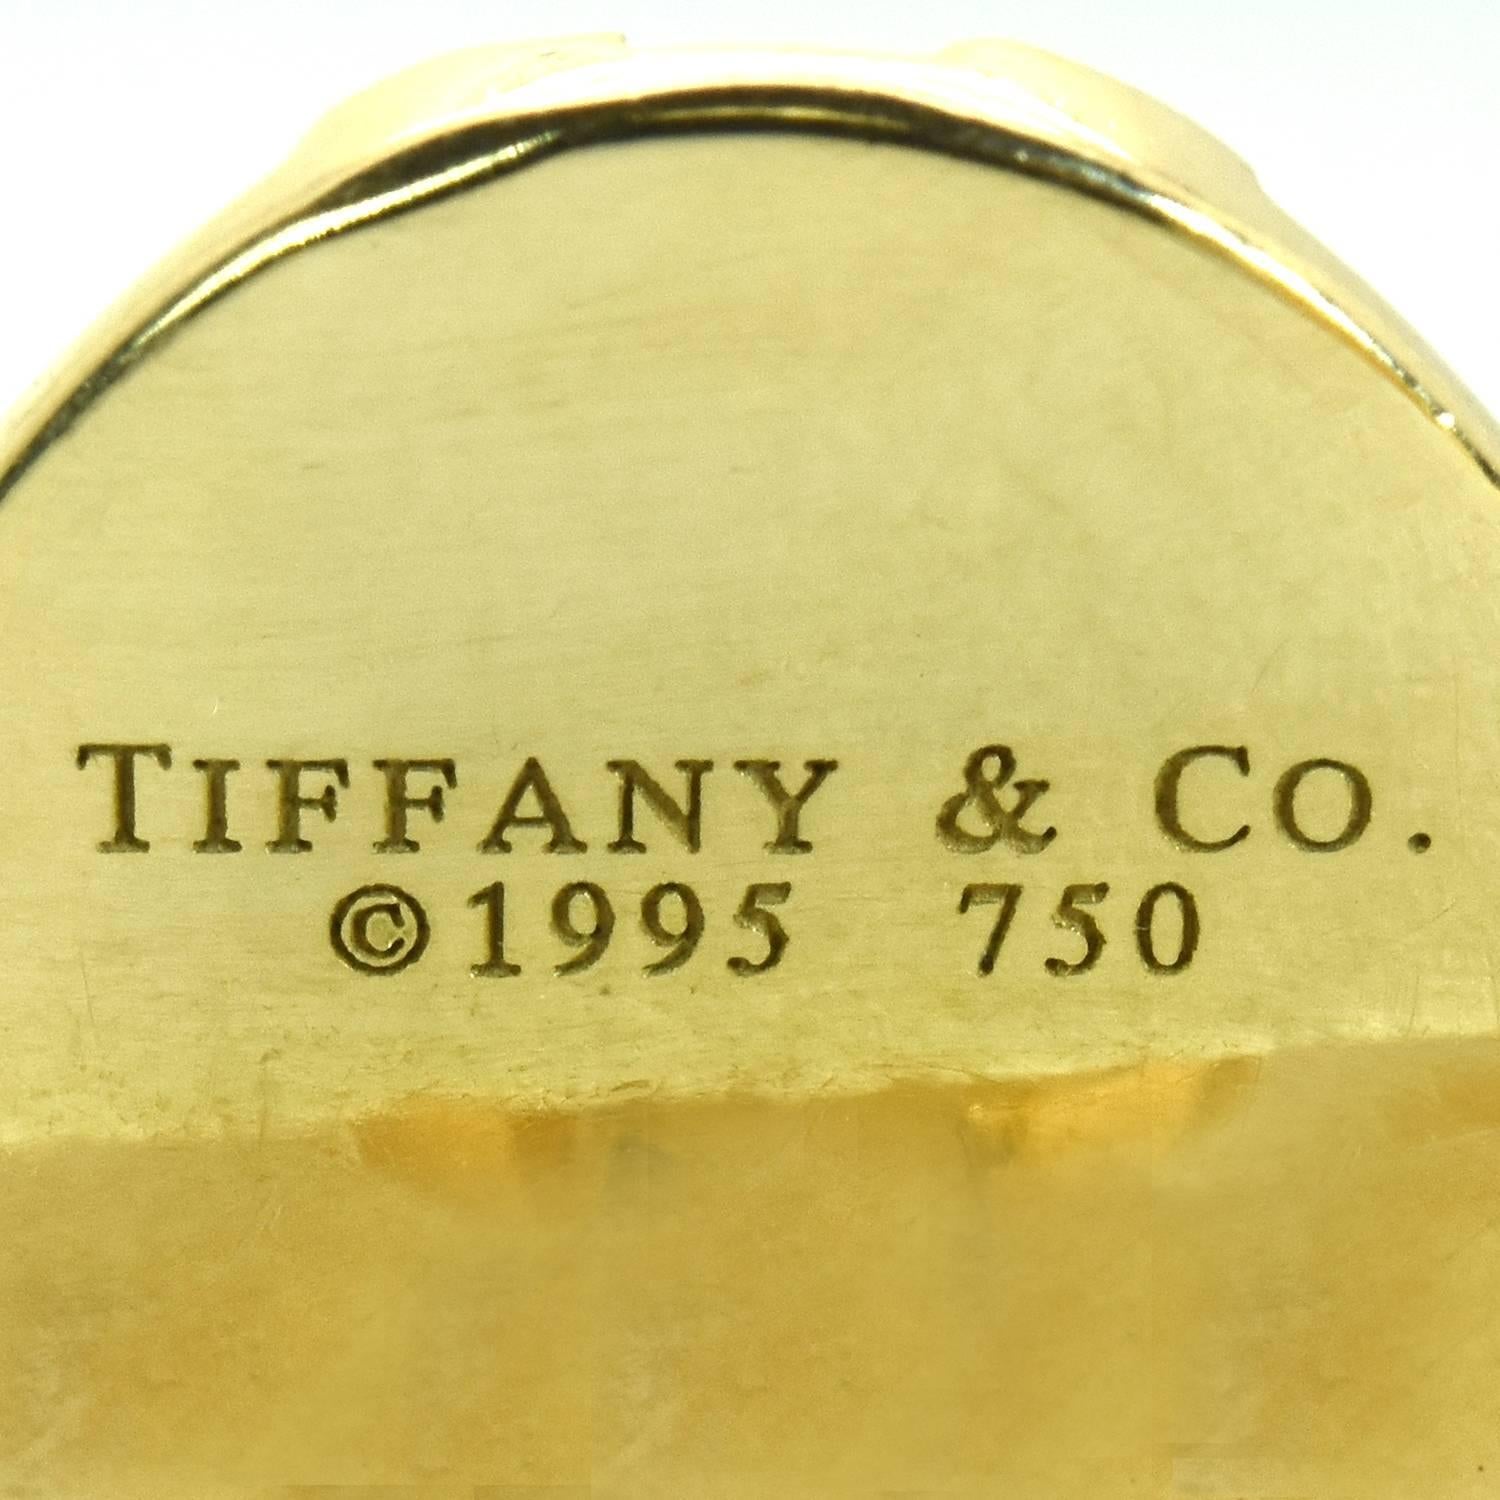 A pair of Tiffany & Co. grooved yellow gold cufflinks from the iconic Atlas collection. Featuring 18k Yellow Gold and signed by Tiffany & Company, 1995.